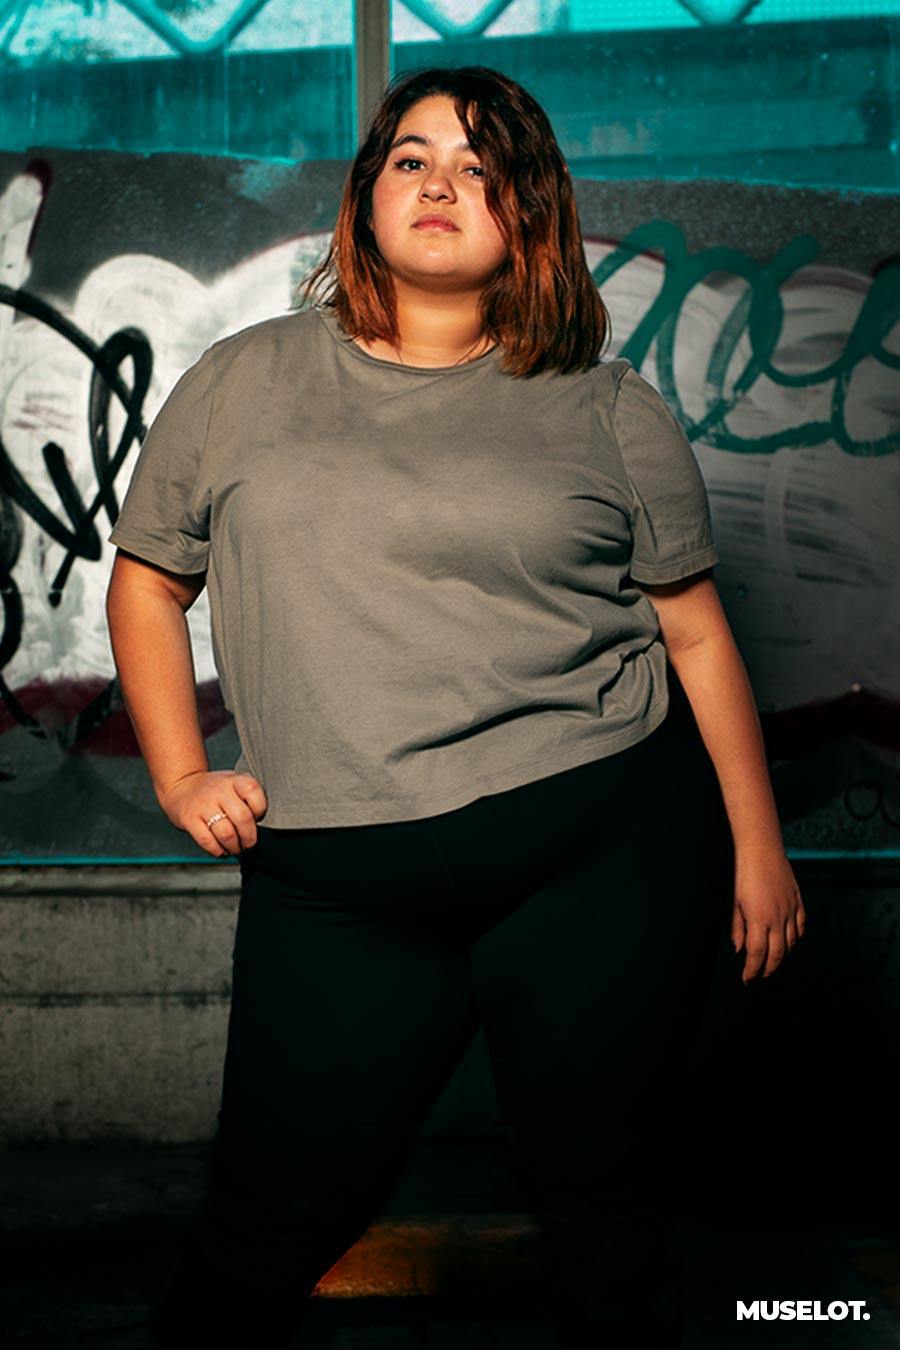 Unisex plus size t shirts in dark solid colors, XL - 5XL